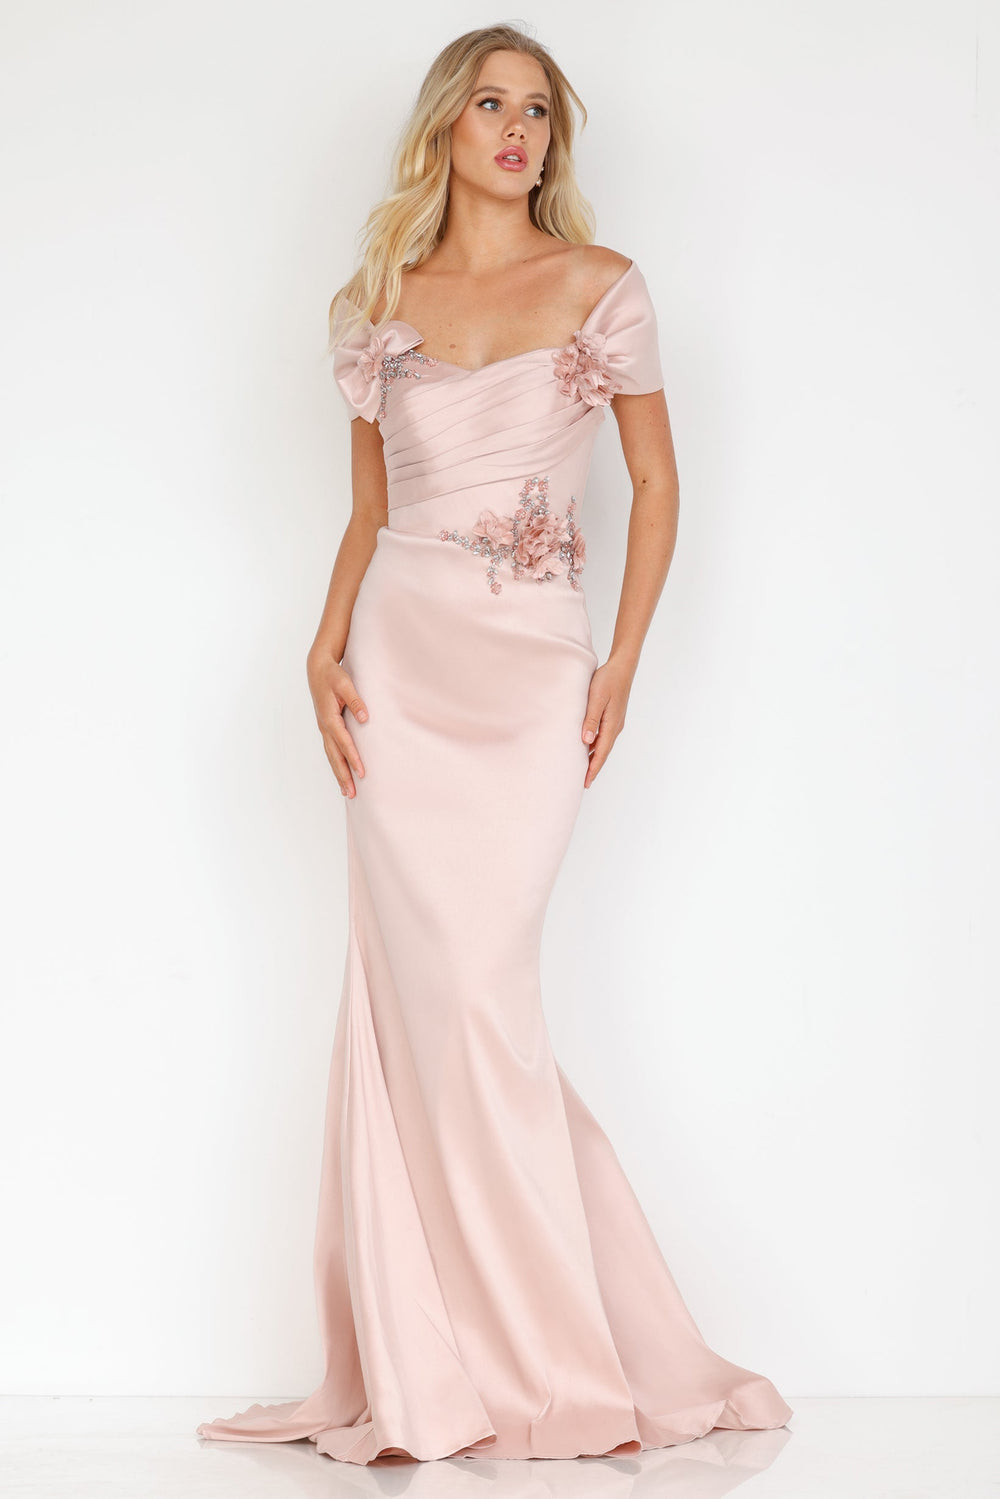 Terani Couture terani couture TERANI COUTURE 2021M2969 MOTHER OF THE BRIDE Dress